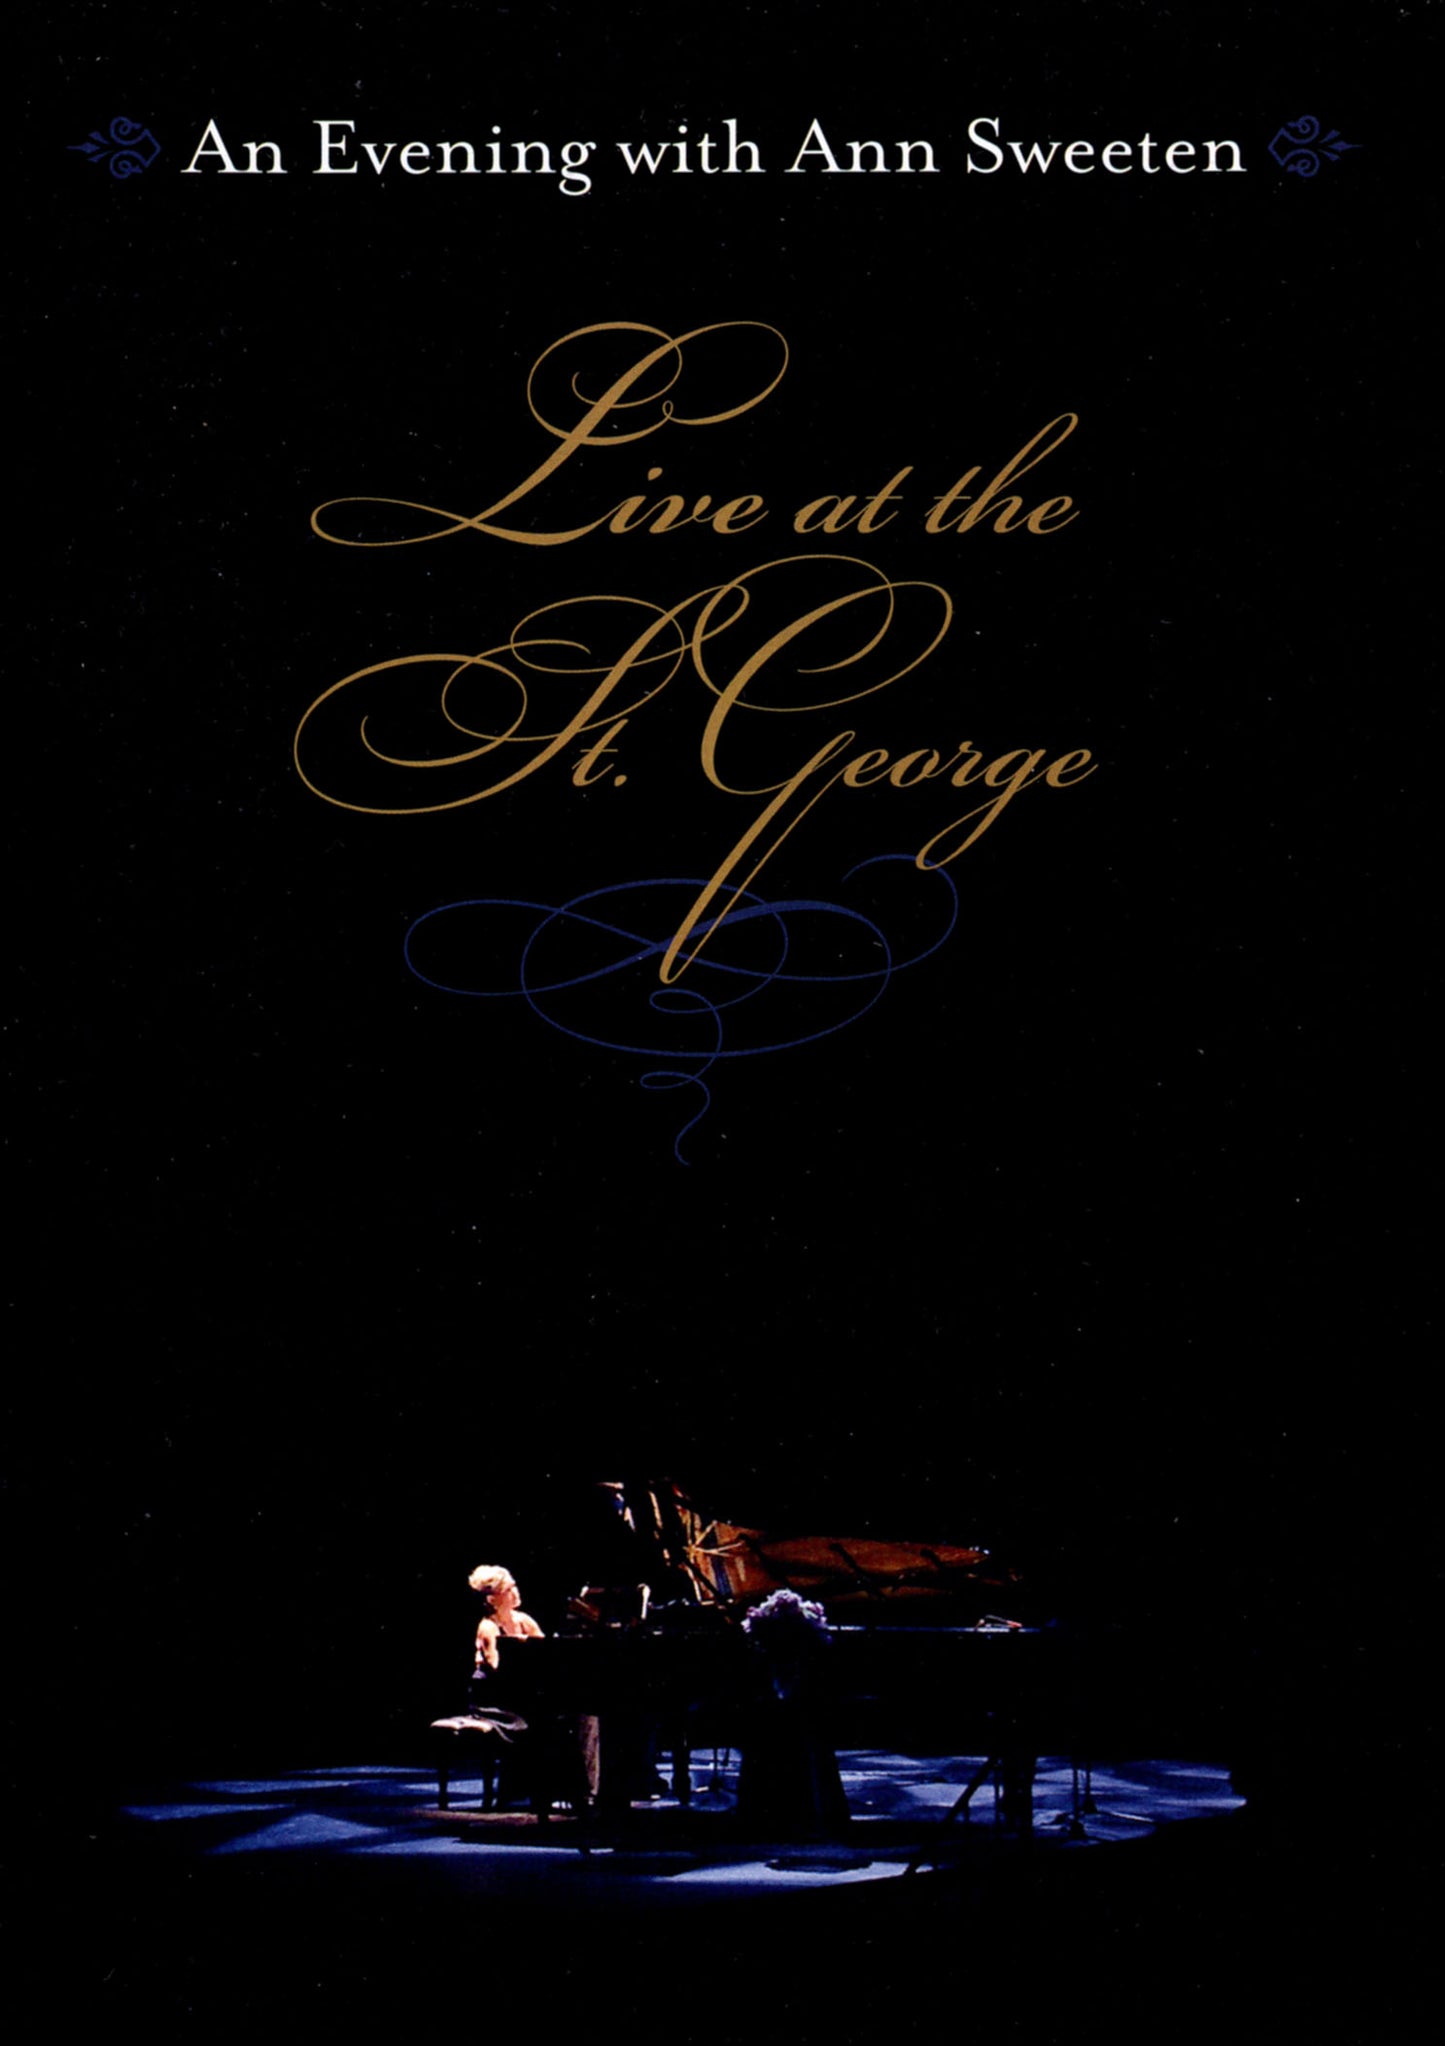 Live at the St. George cover art